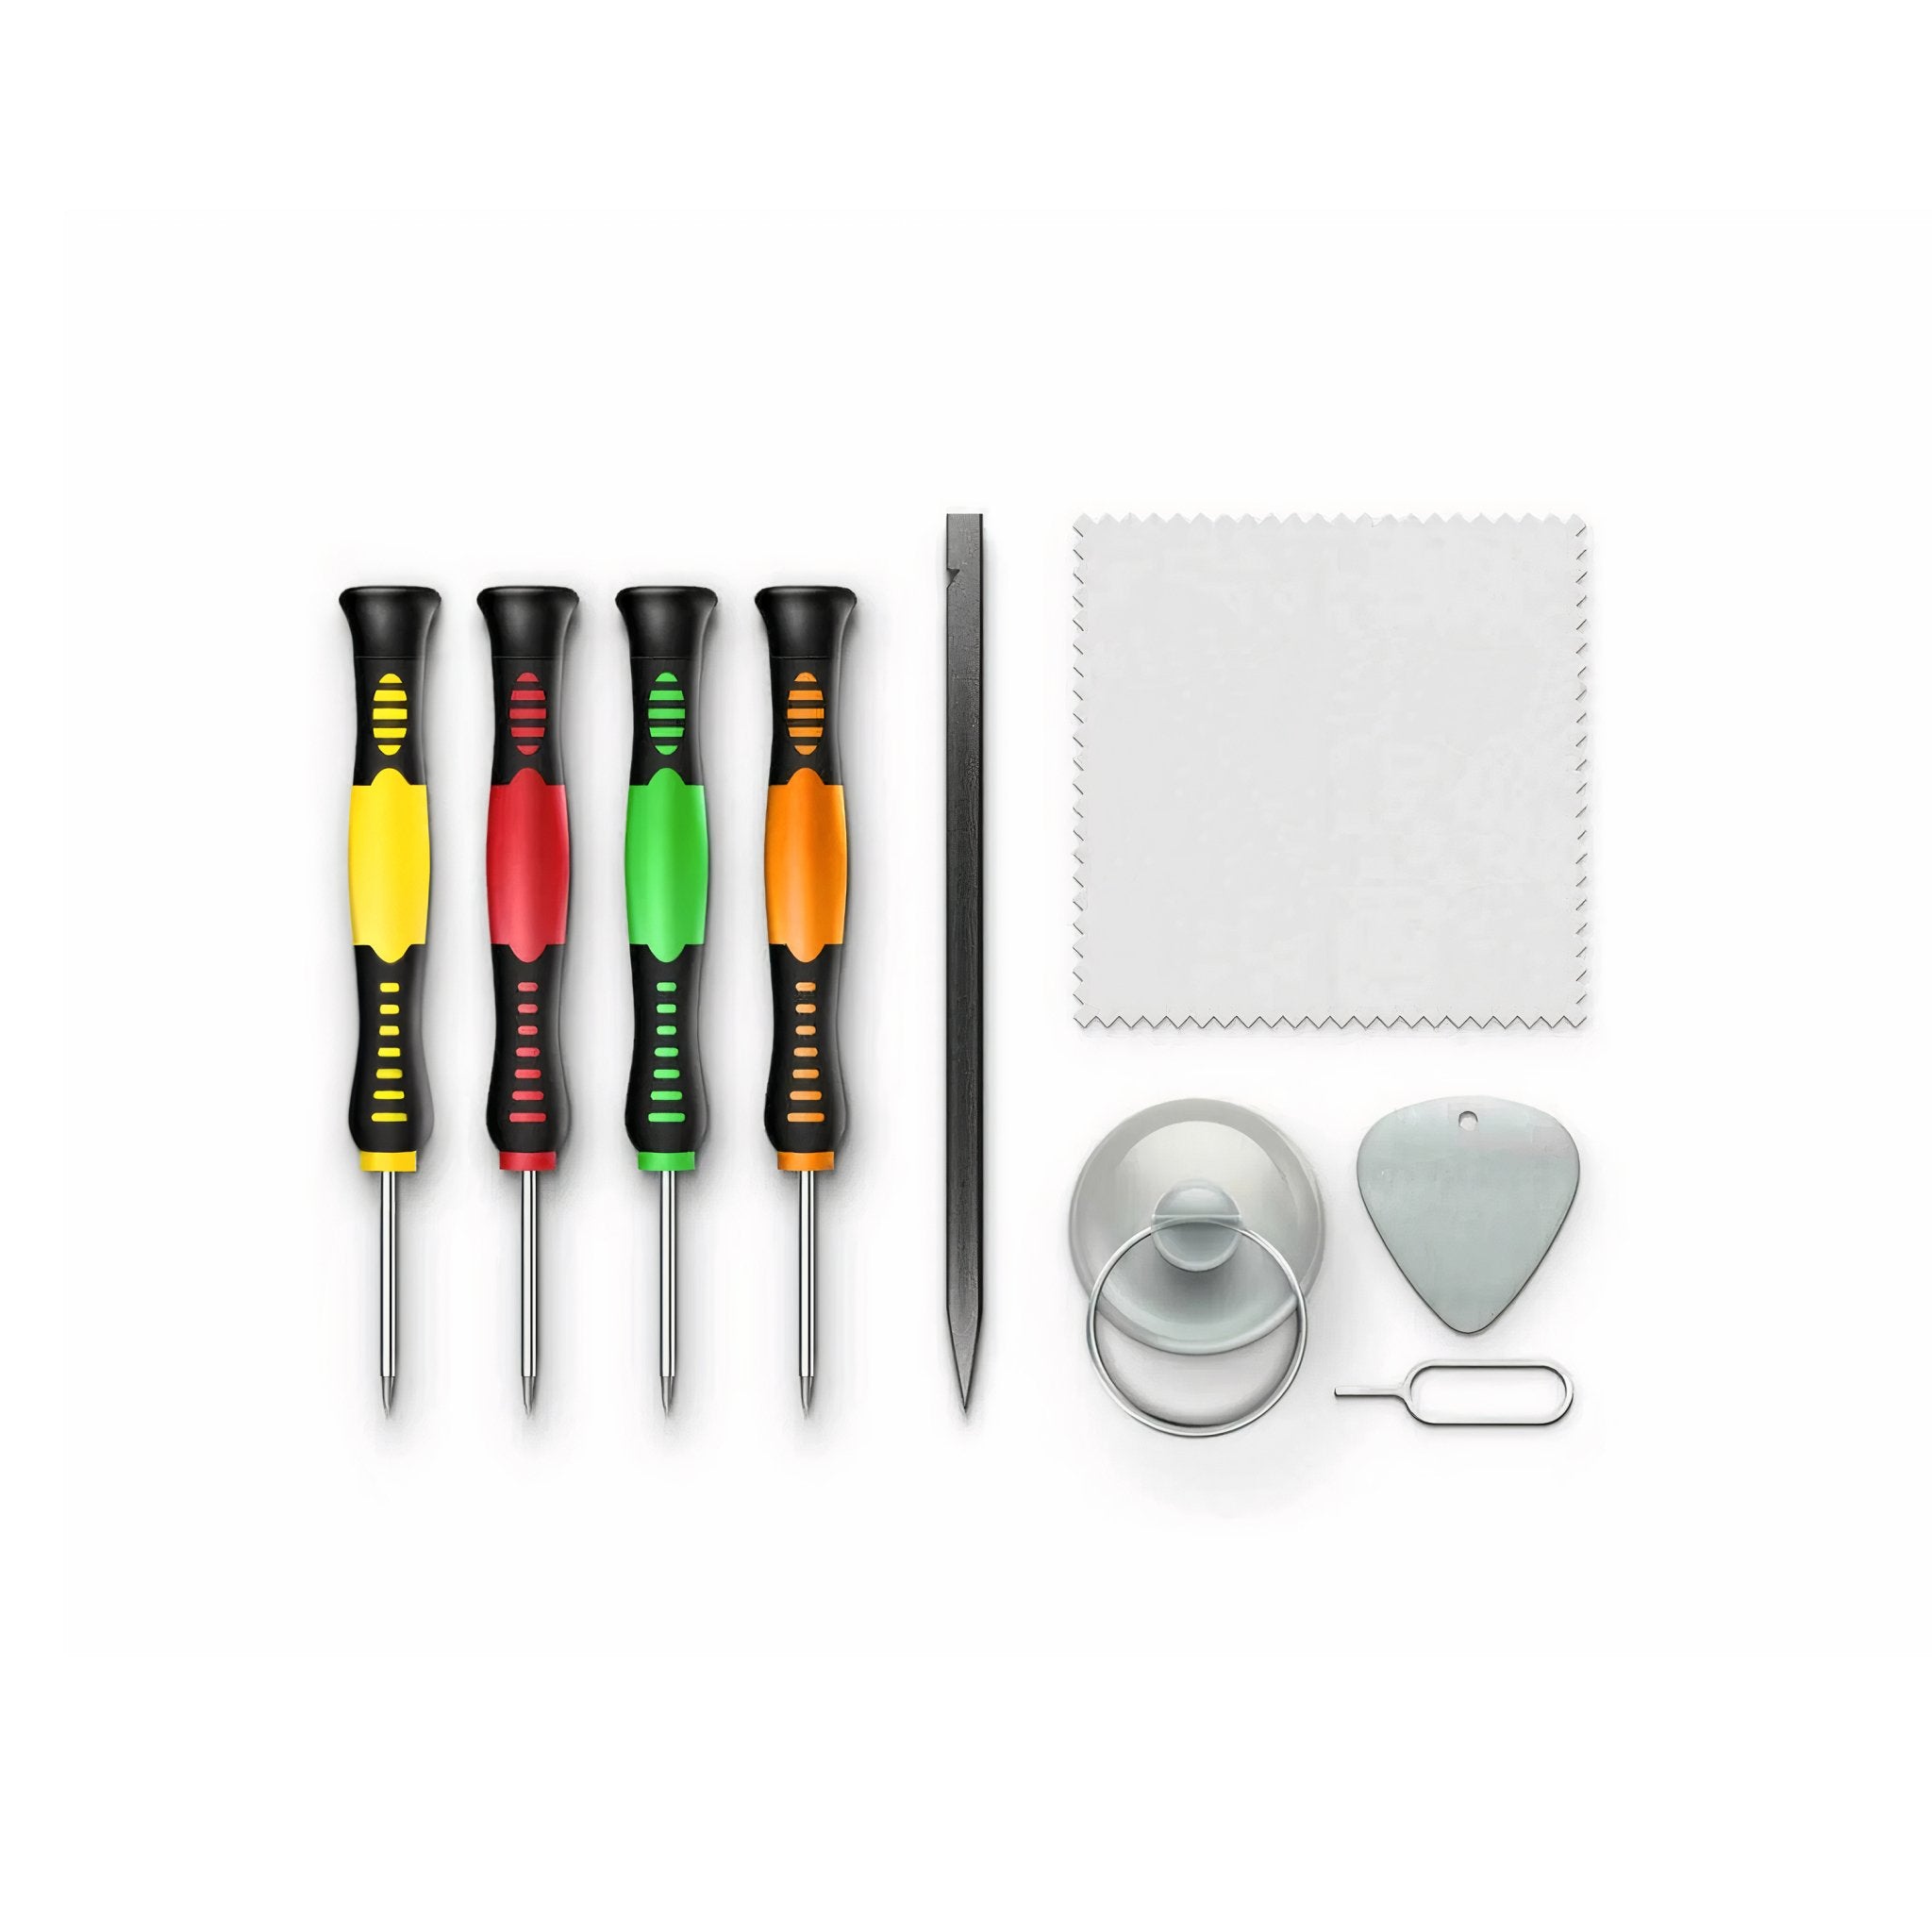 iPhone 6s Plus Screen Replacement Kit - FixProvider